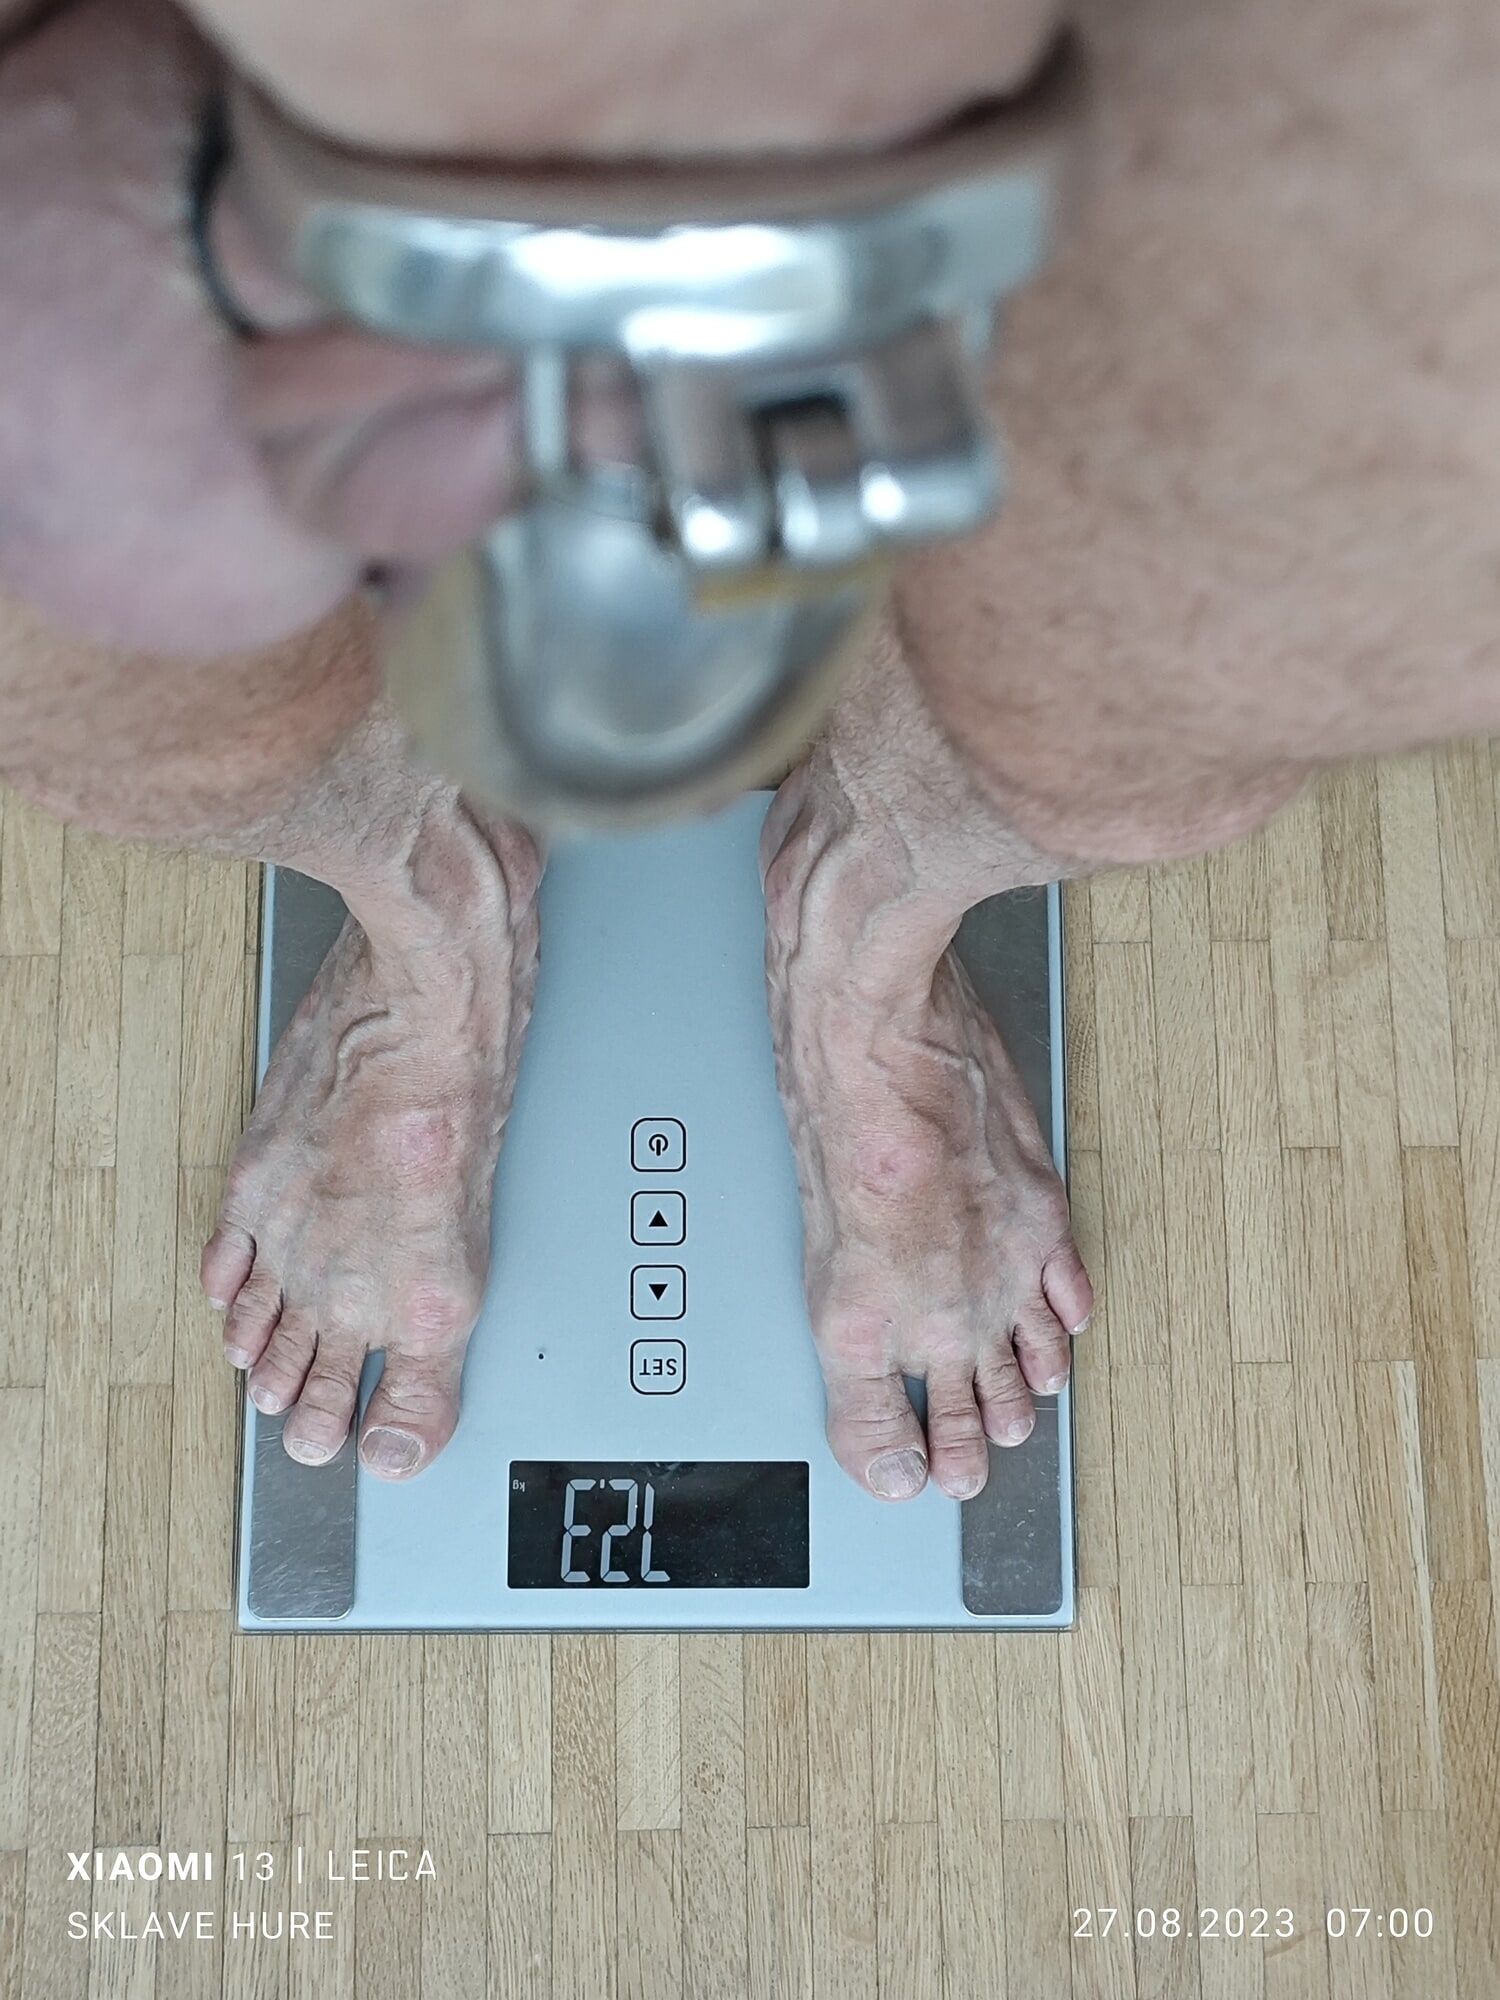 Weighing, Cagecheck, fuck with the plug on July 27th, 2023